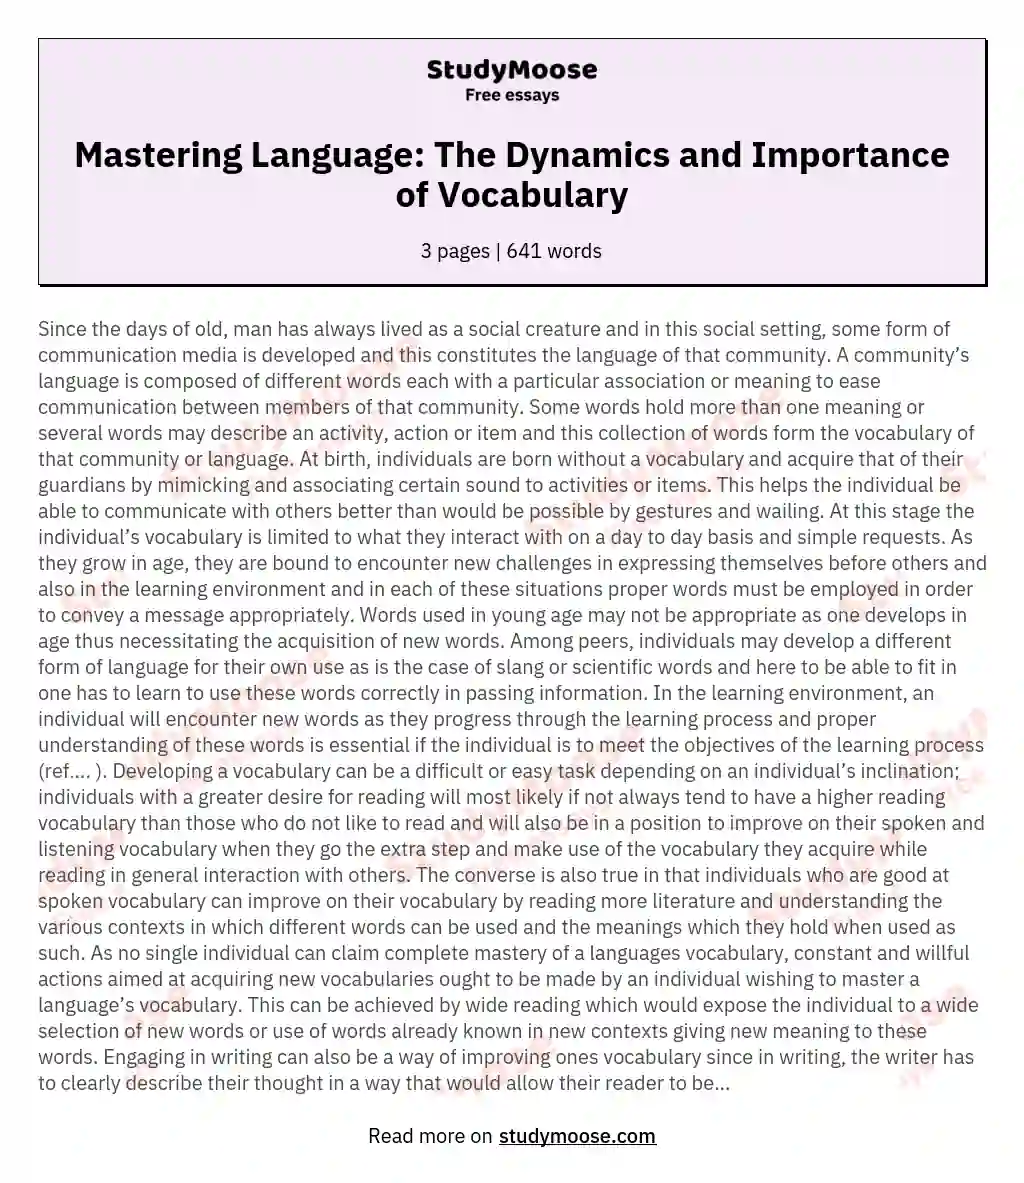 Mastering Language: The Dynamics and Importance of Vocabulary essay